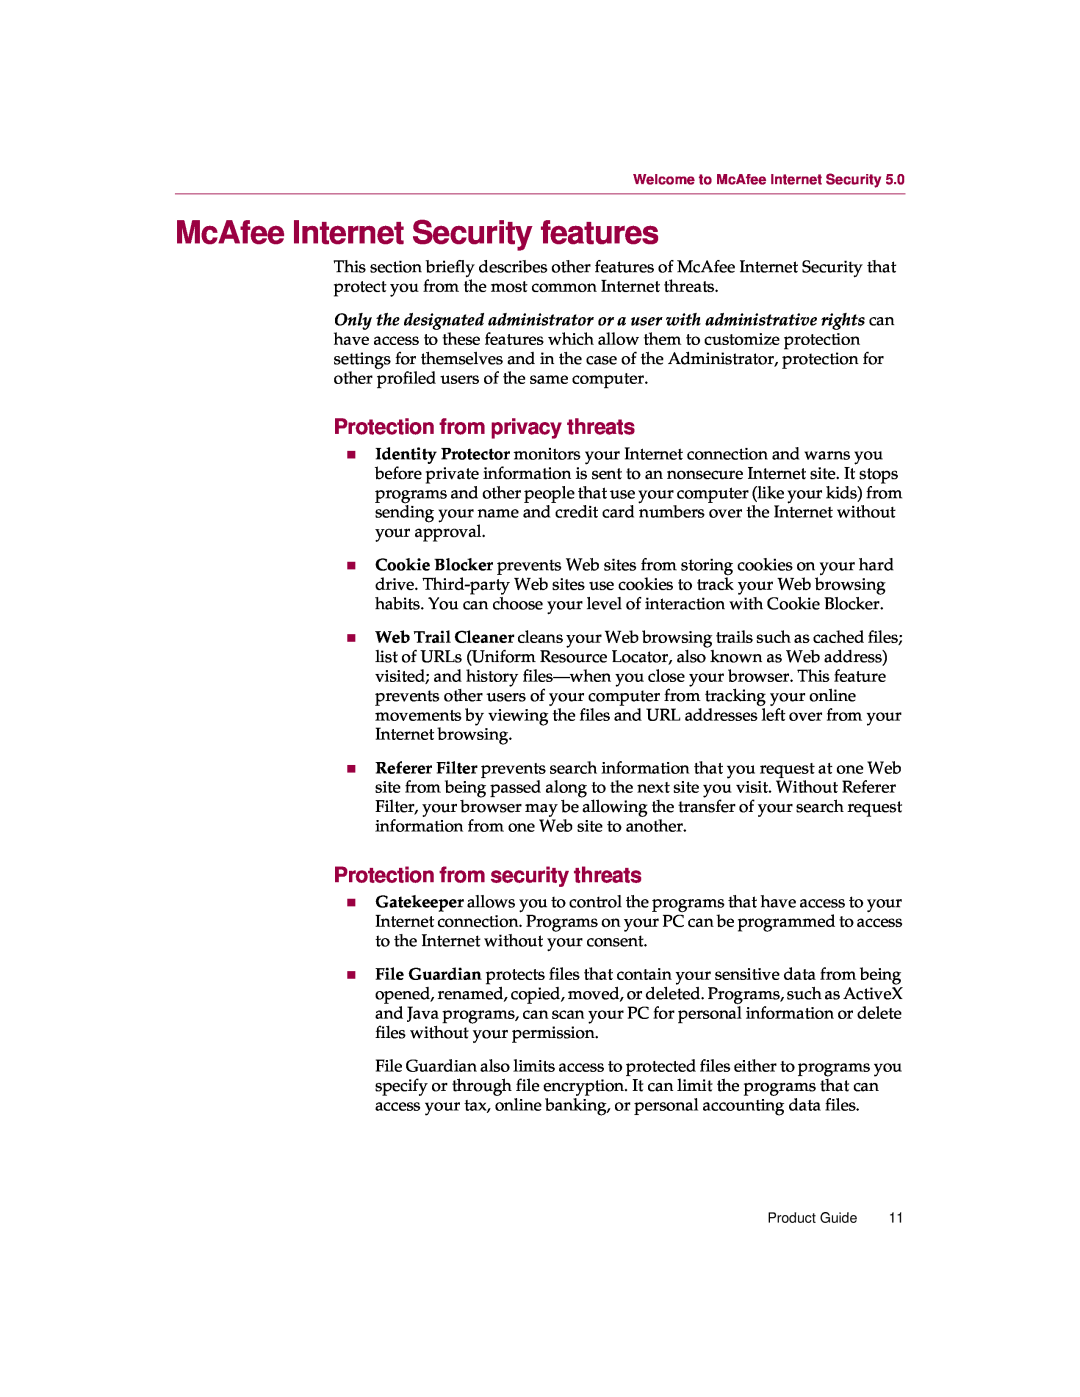 McAfee 5 manual McAfee Internet Security features, Protection from privacy threats, Protection from security threats 